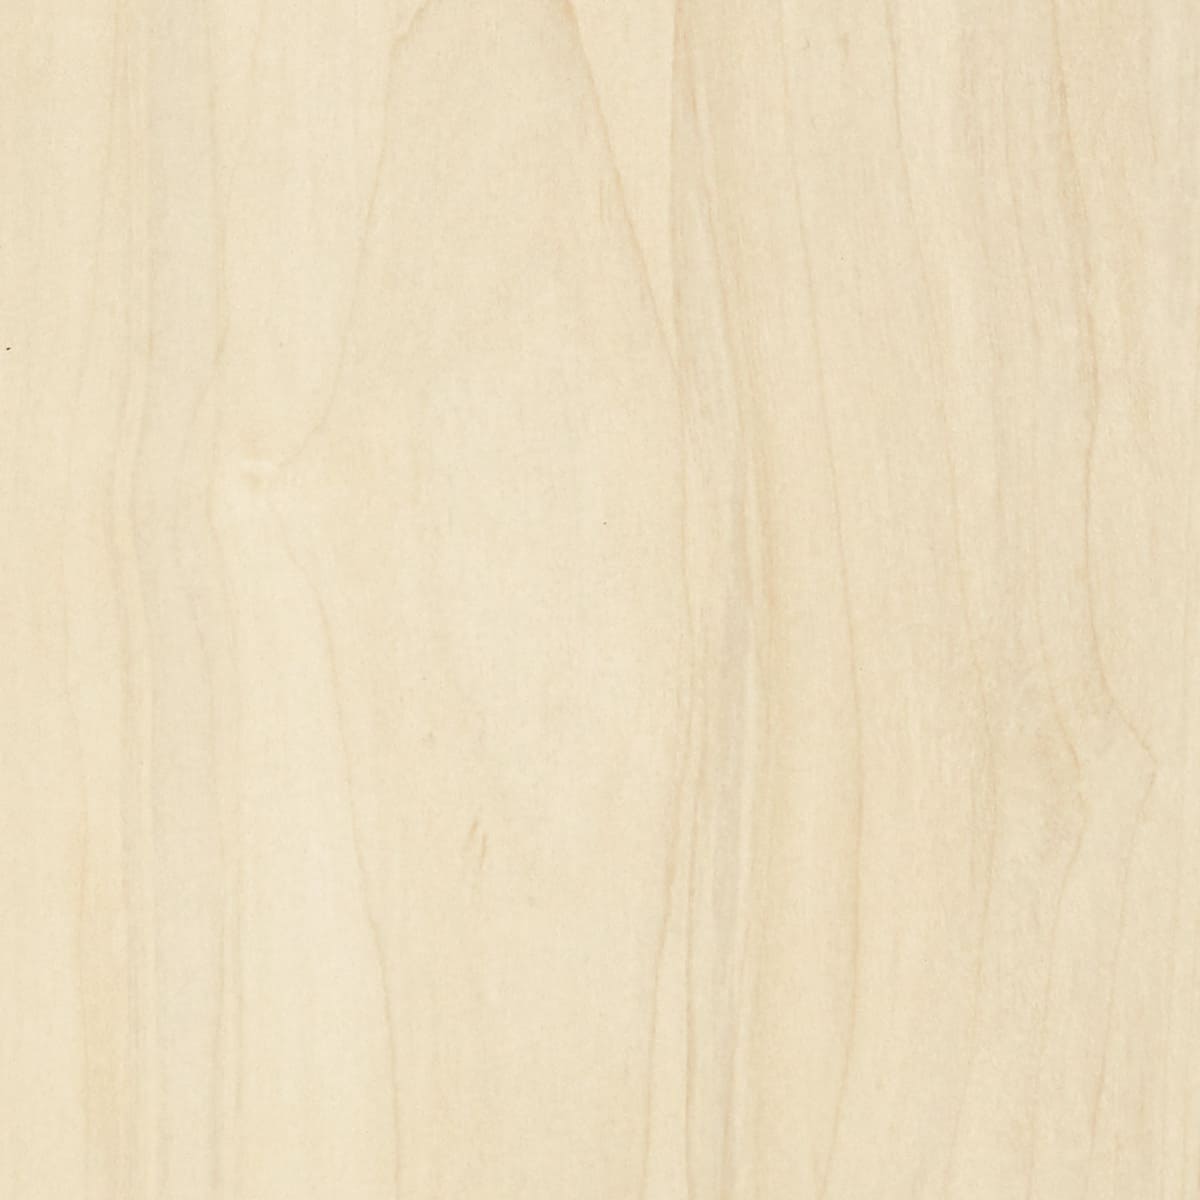 LX_ColourCollection_Waxed_Maple_Natural_RGB_1200x1200_LR